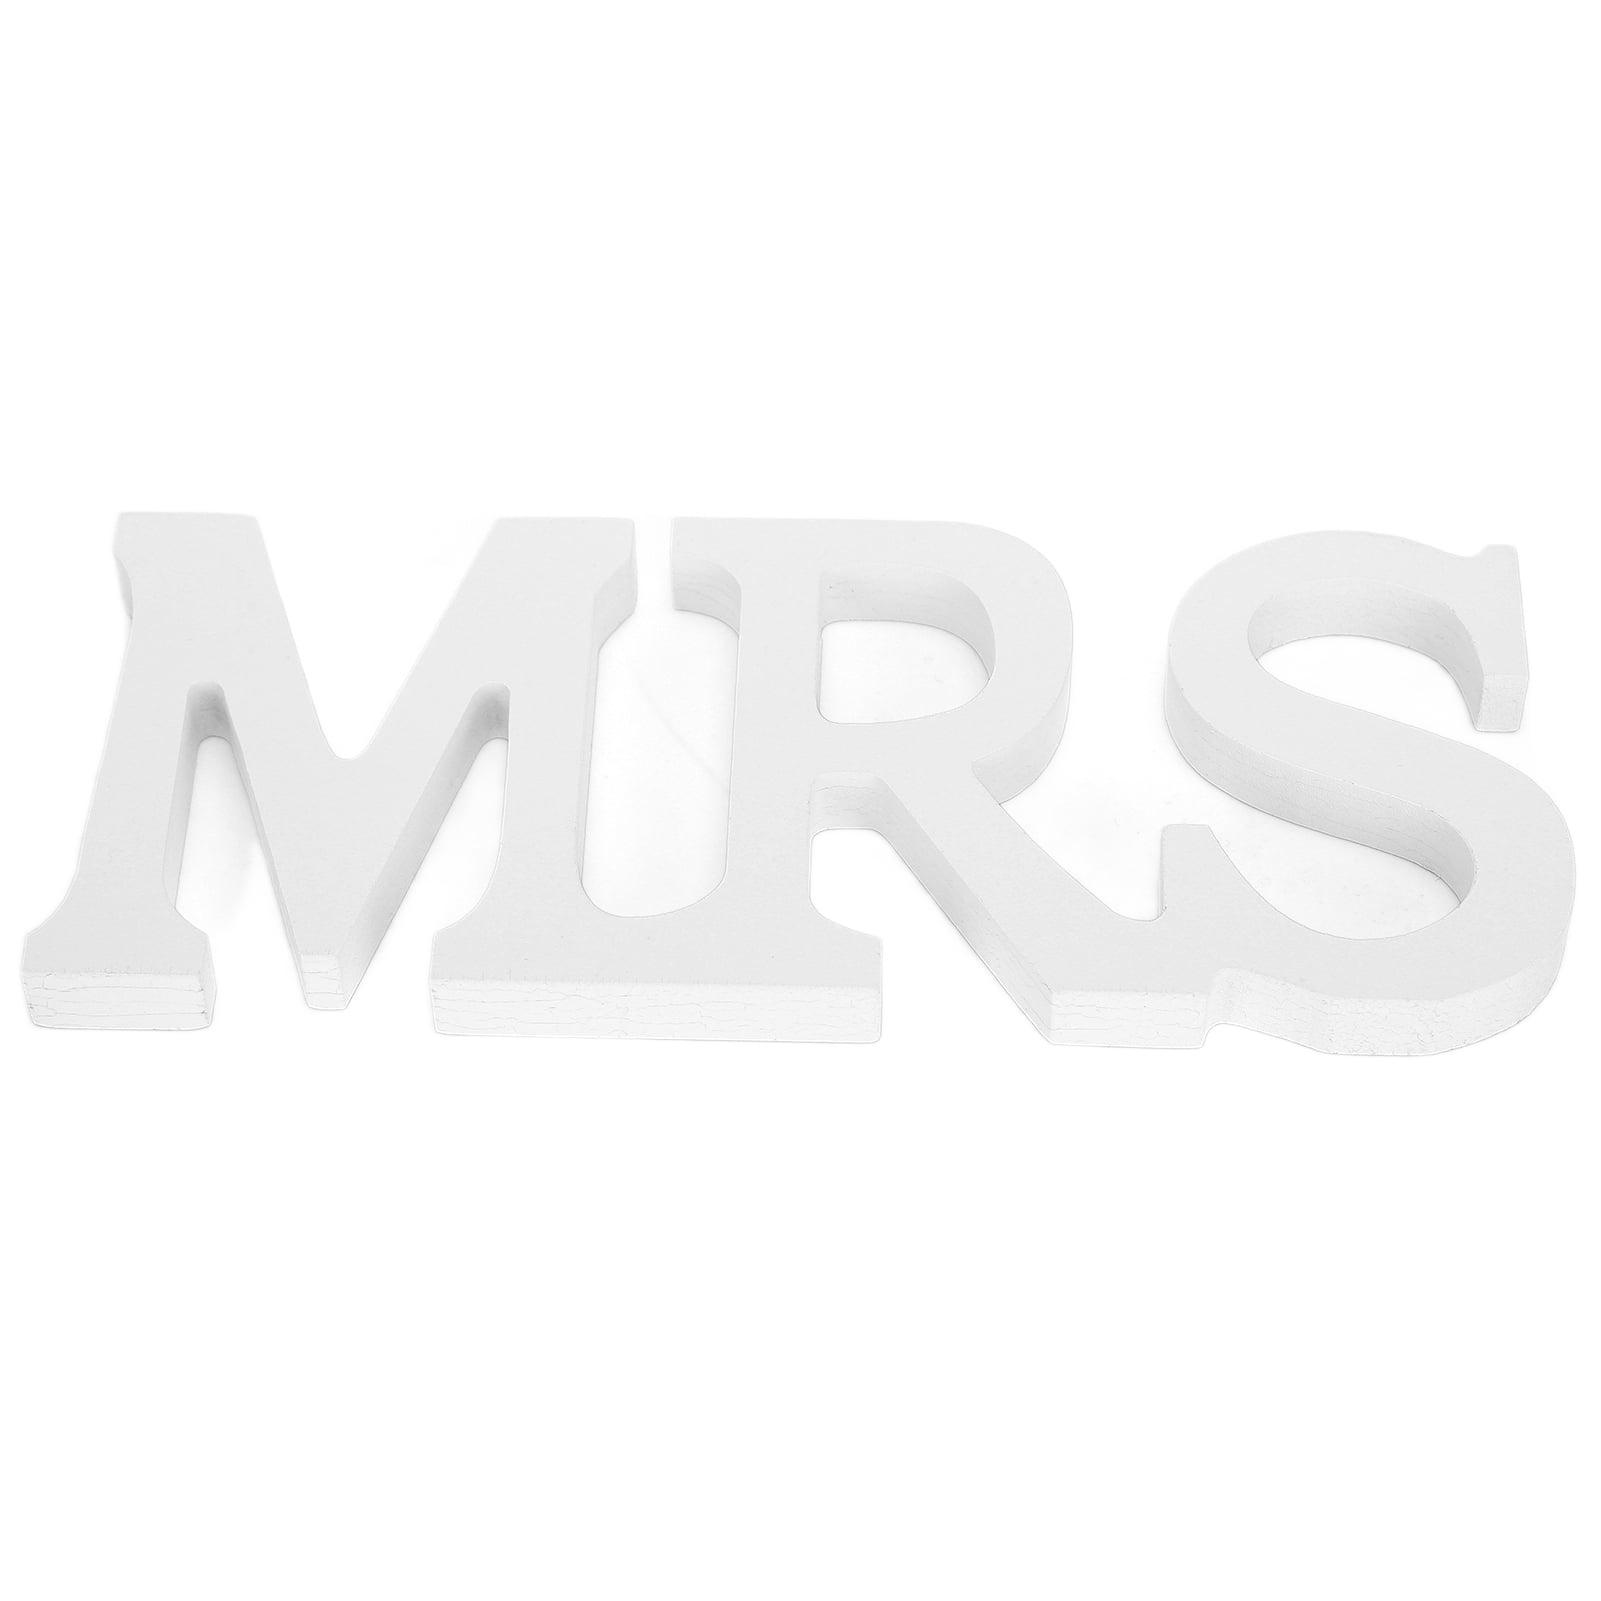 White/Black Mr and Mrs Letters Sign Wooden Standing Top Table Wedding Decoration 